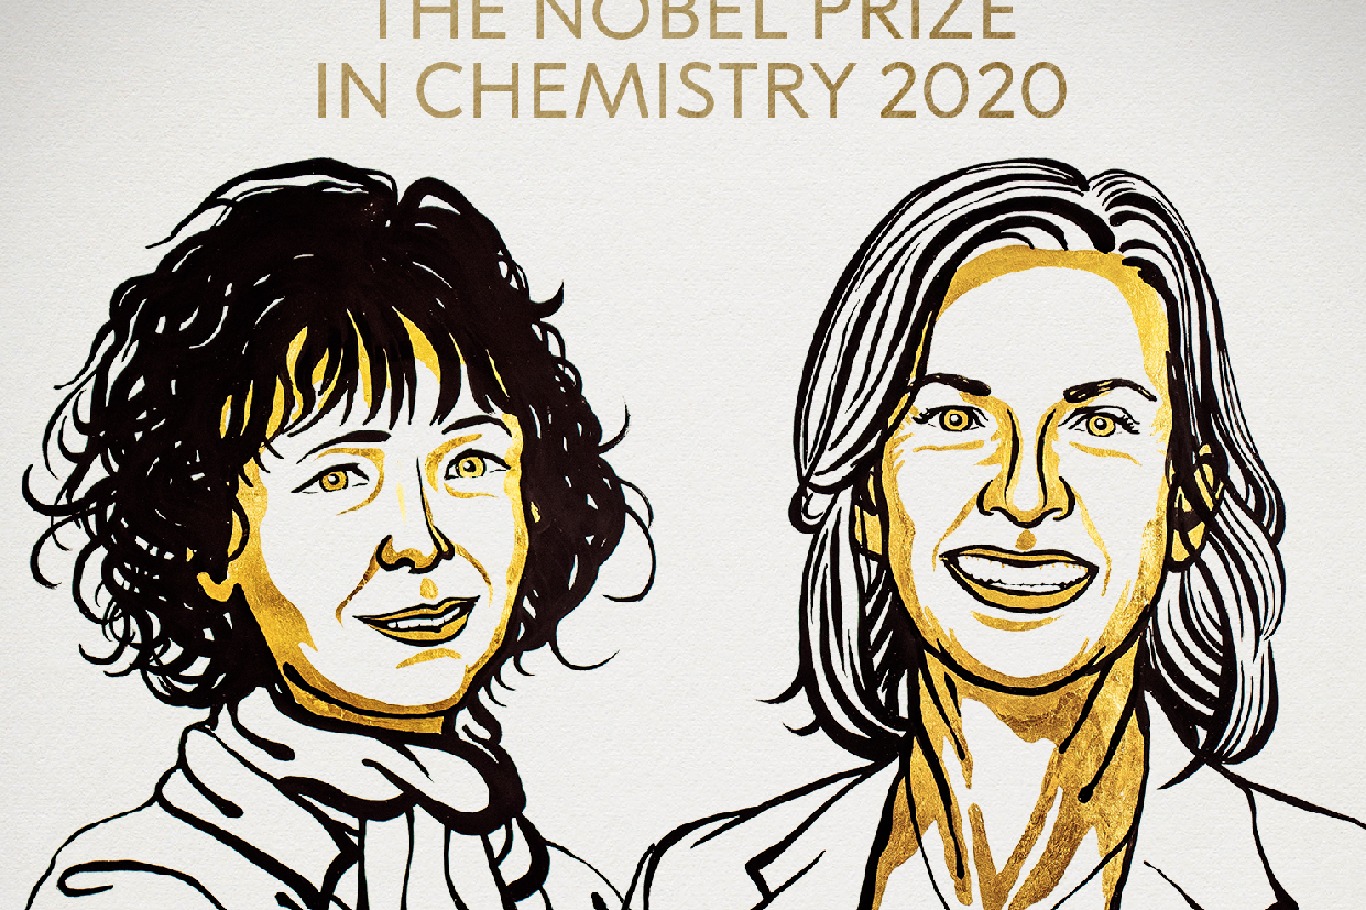 Two women wins this year Nobel Prize